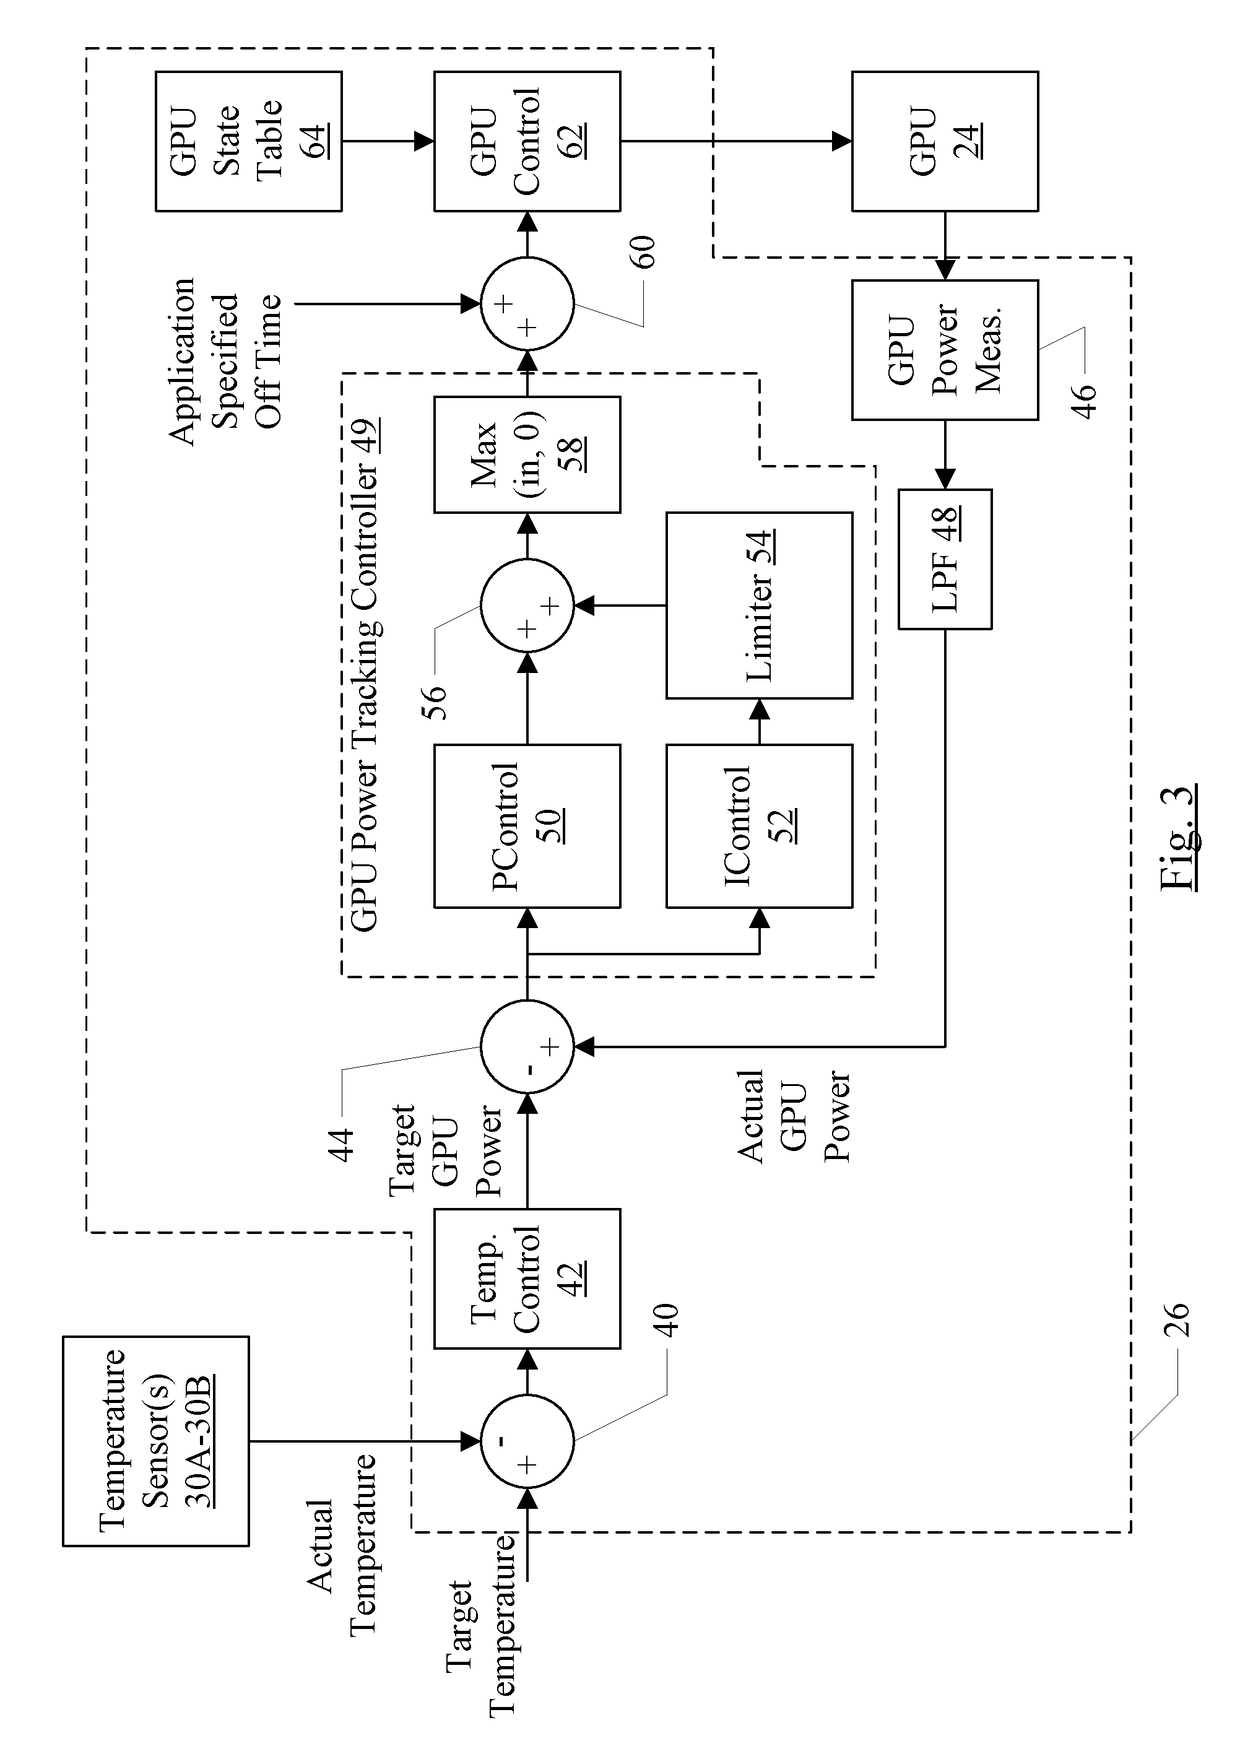 Power management for a graphics processing unit or other circuit